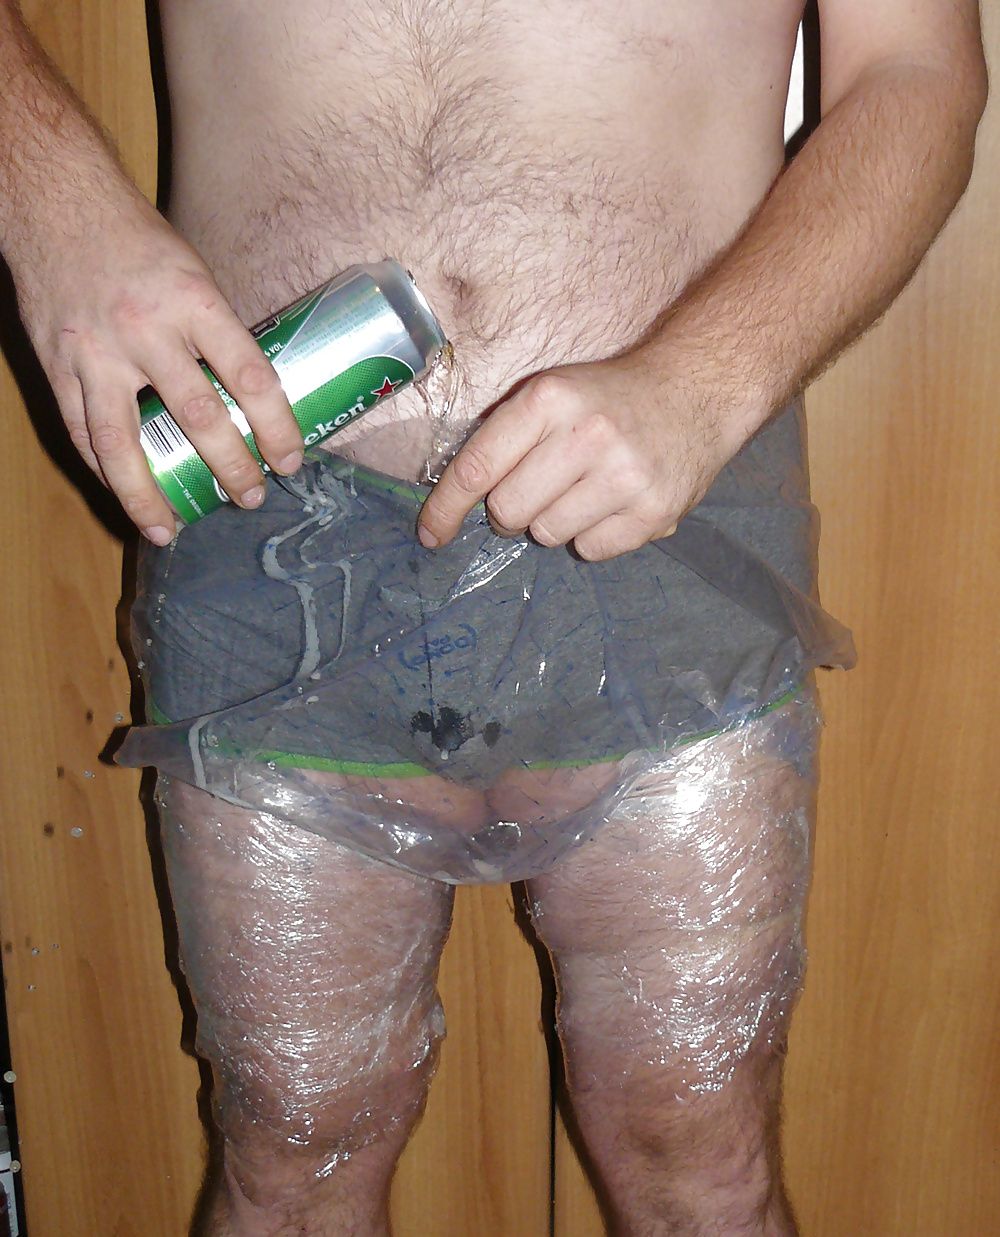 Humiliation with beer #5